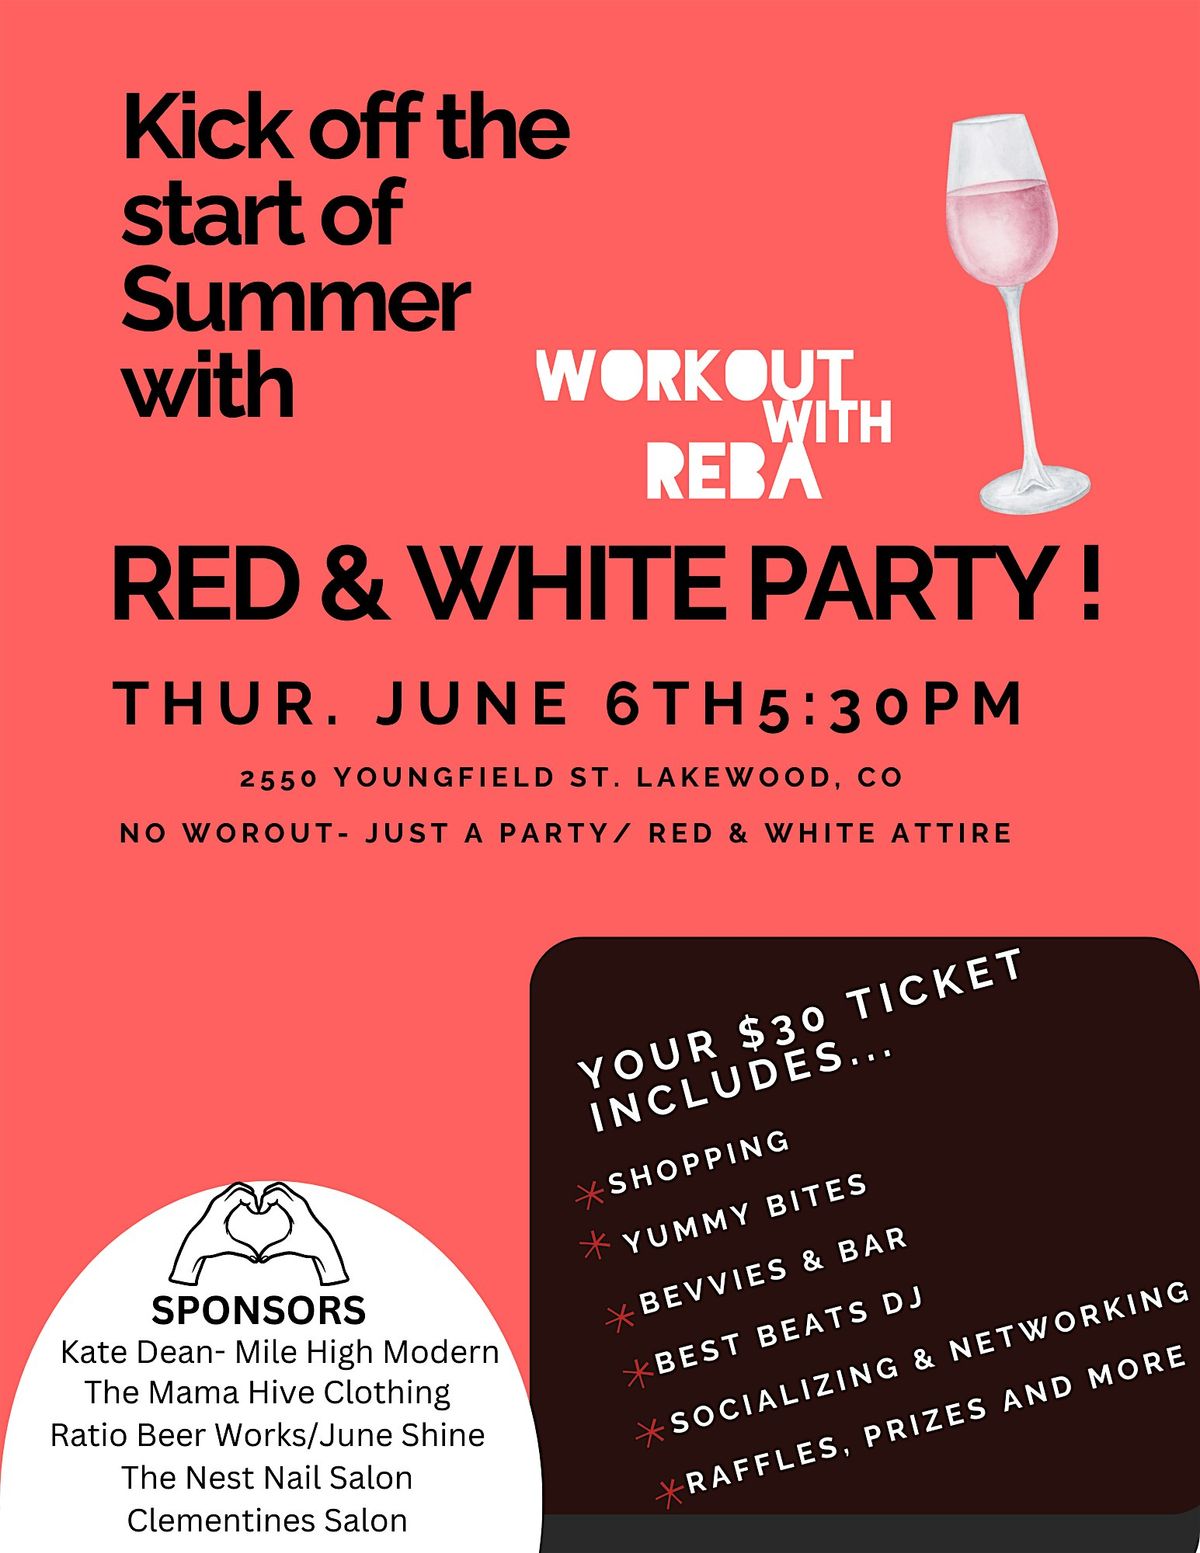 Red & White Party (hosted by Workout with Reba)